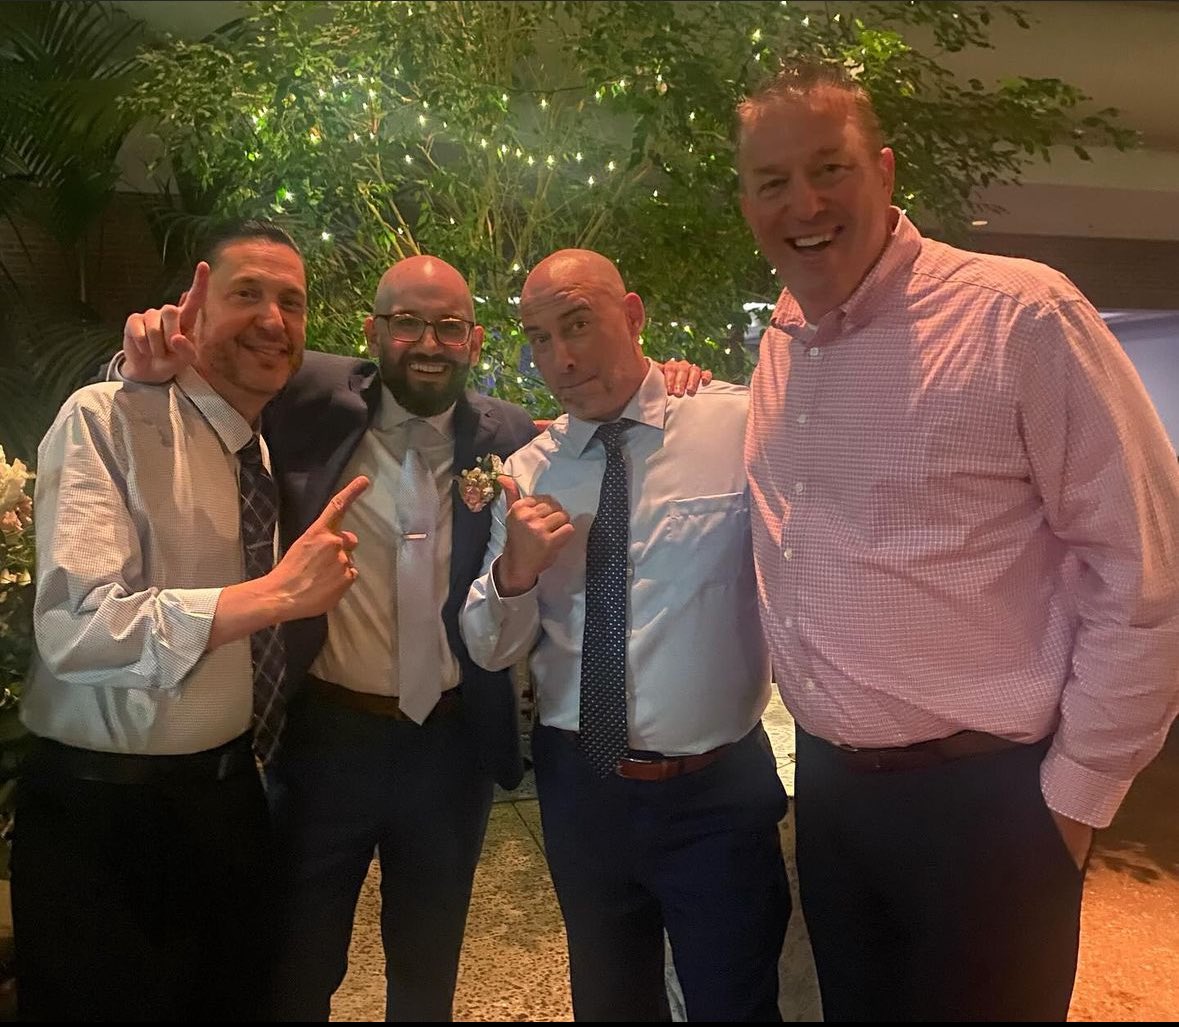 Help us congratulate Coach Cincinnati as he tied the knot yesterday in a beautiful ceremony attended by South Lakes’ own Coach Desmond, Coach Byrnes and Coach Duggan.